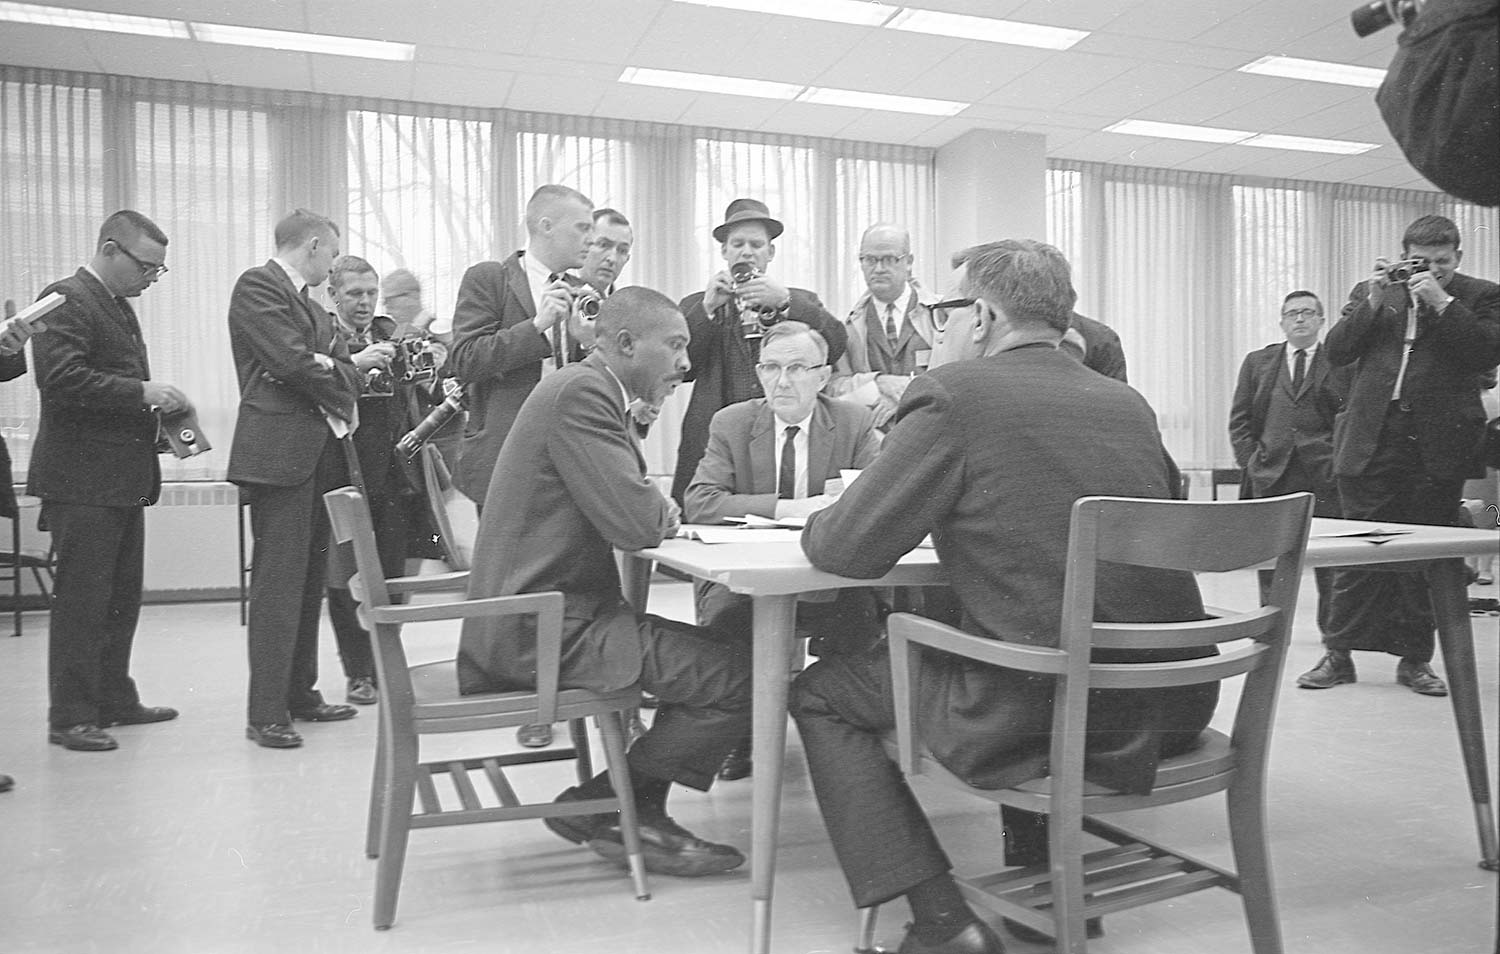 Harold Franklin sits a conference table with other men